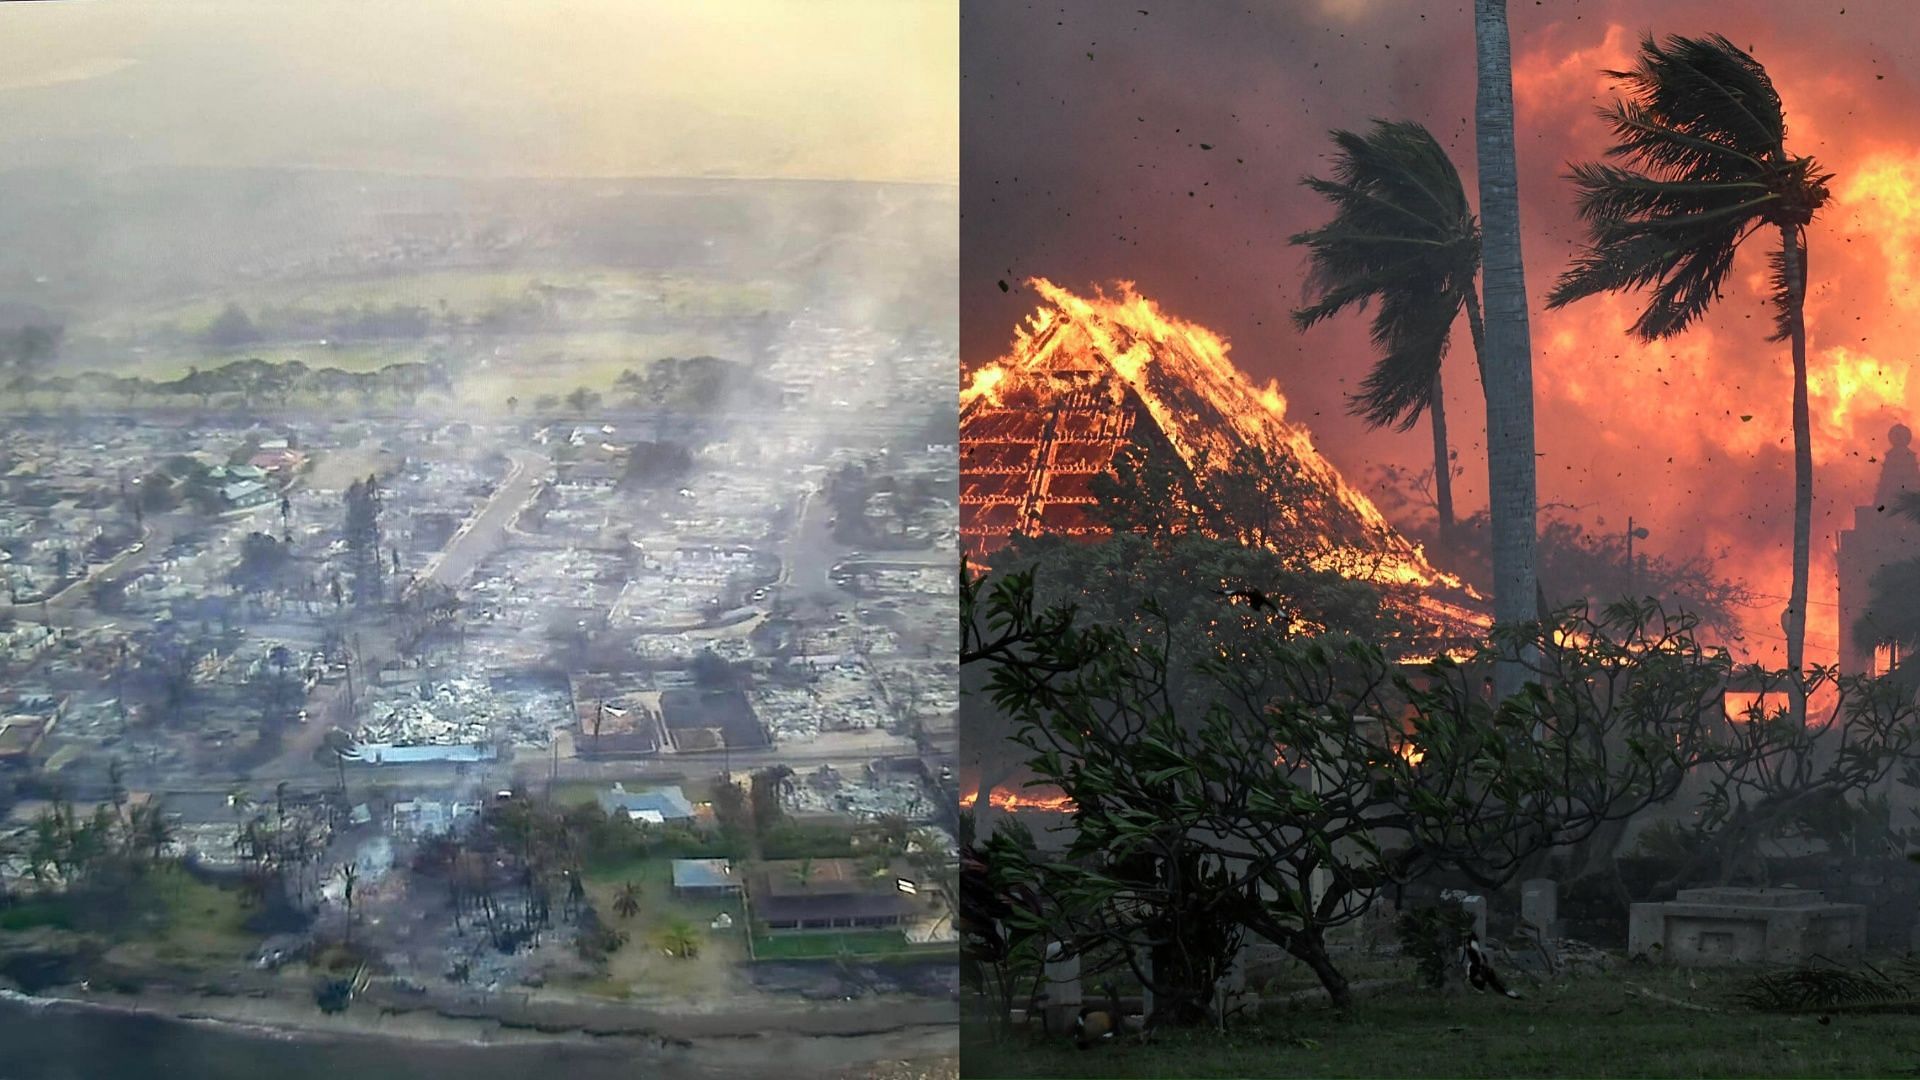 A Maui resident claimed that the island was burned down to rebuild it into a satellite city. (Image via X/Steve Lookner)